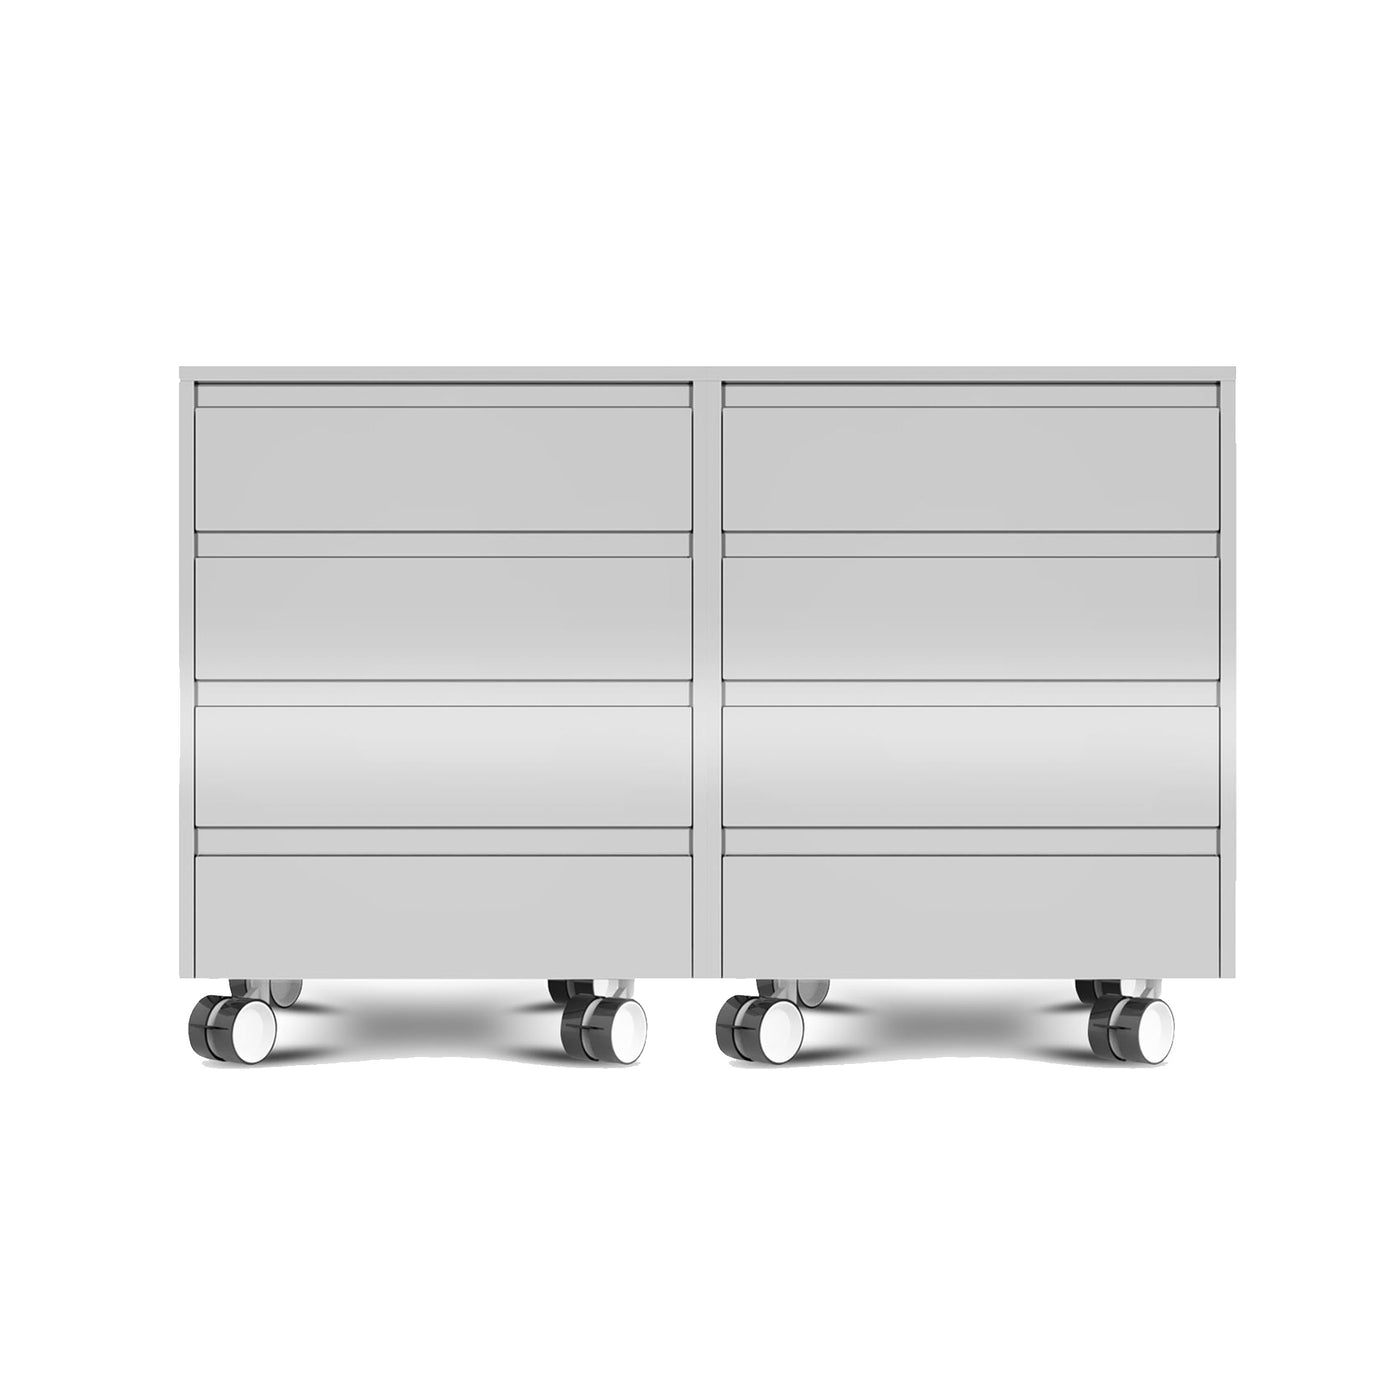 Modular Outdoor Stainless Steel Kitchen BURANO Four Drawers by LISA 06